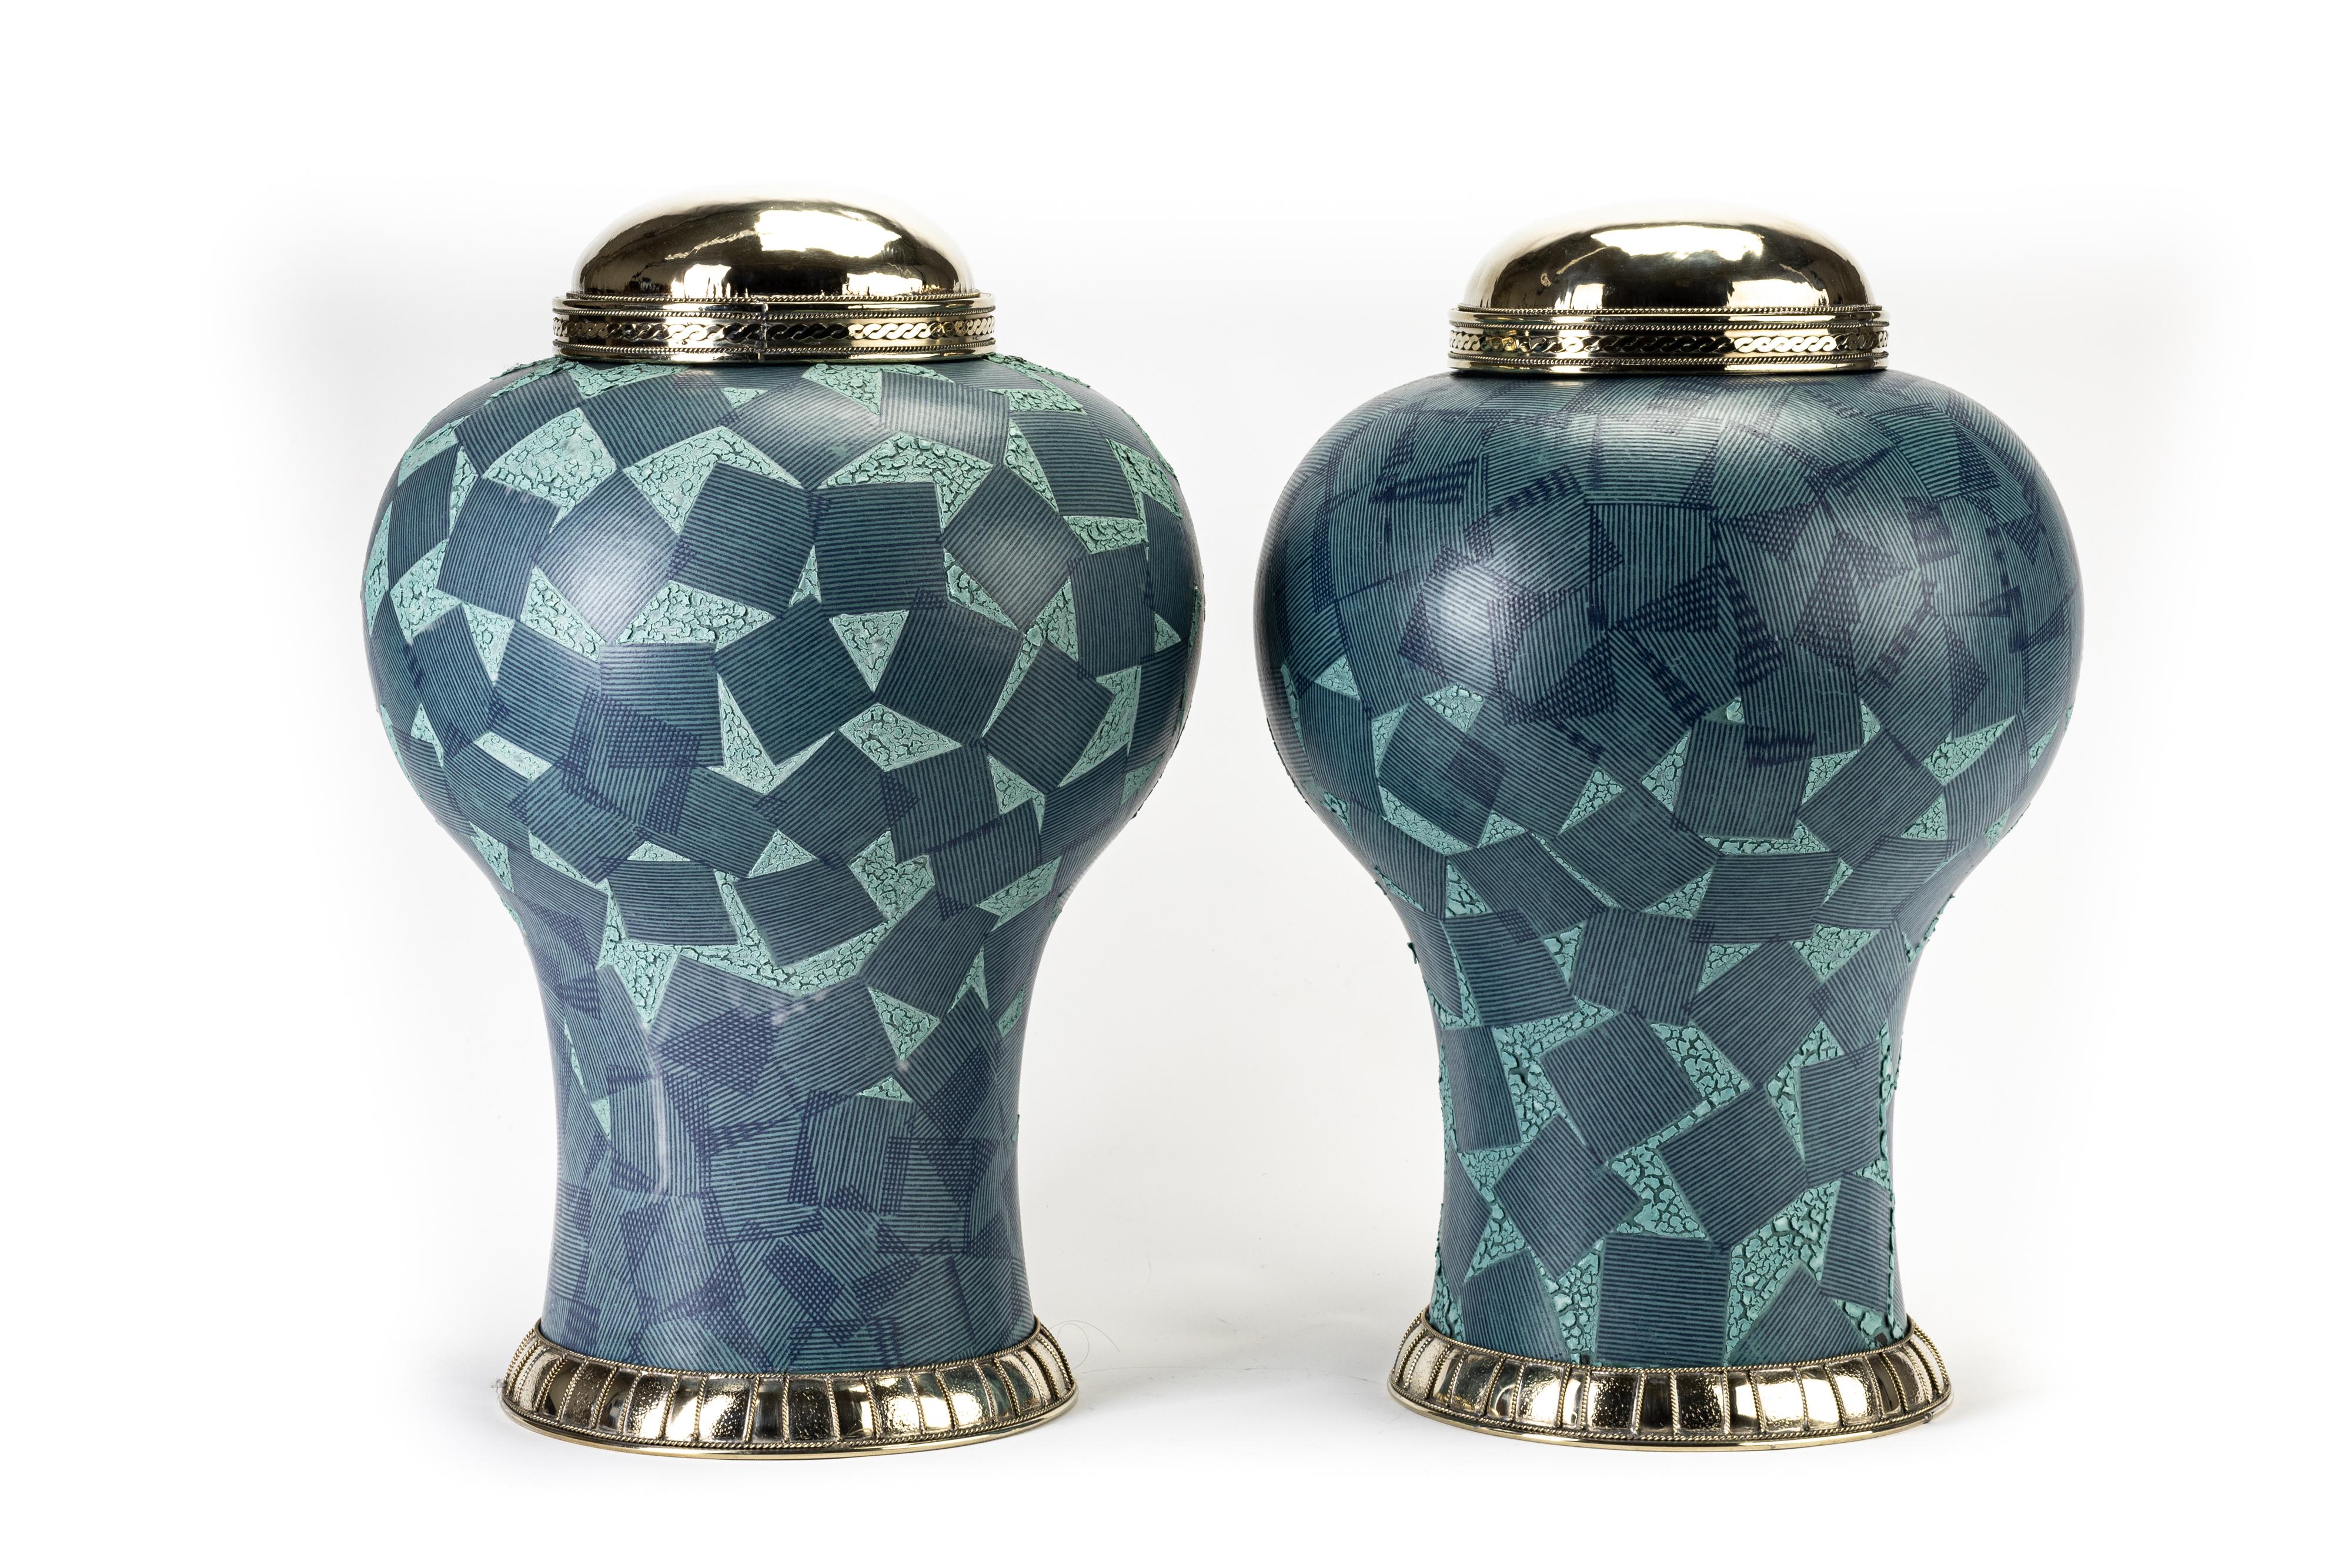 Mexican Blue and Gren Jar by Estudio Guerrero, Glazed Ceramic and White Metal